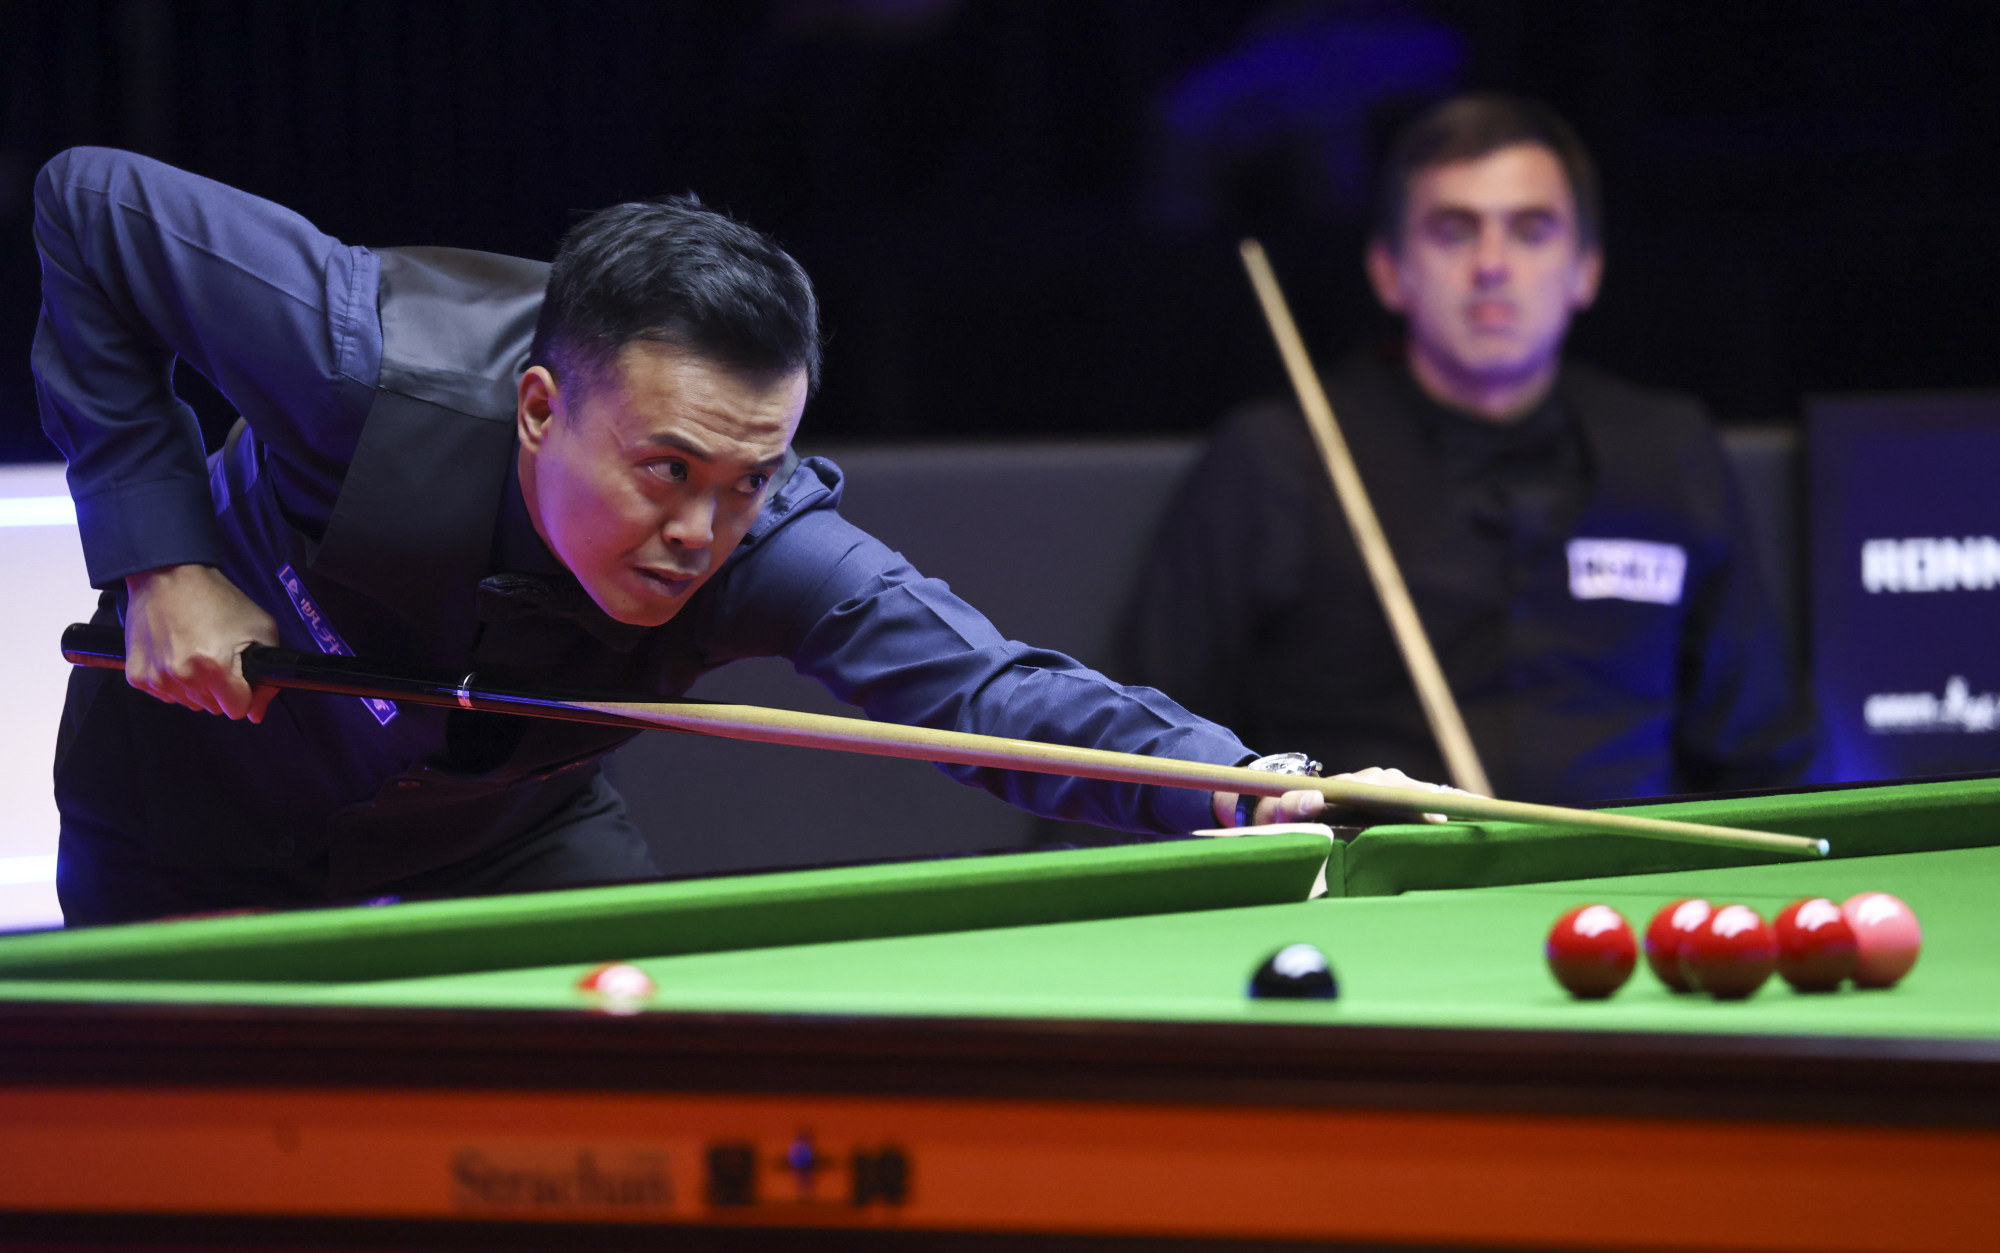 Hong Kong Masters Ronnie OSullivan ends Marco Fus dream run as he claims title South China Morning Post